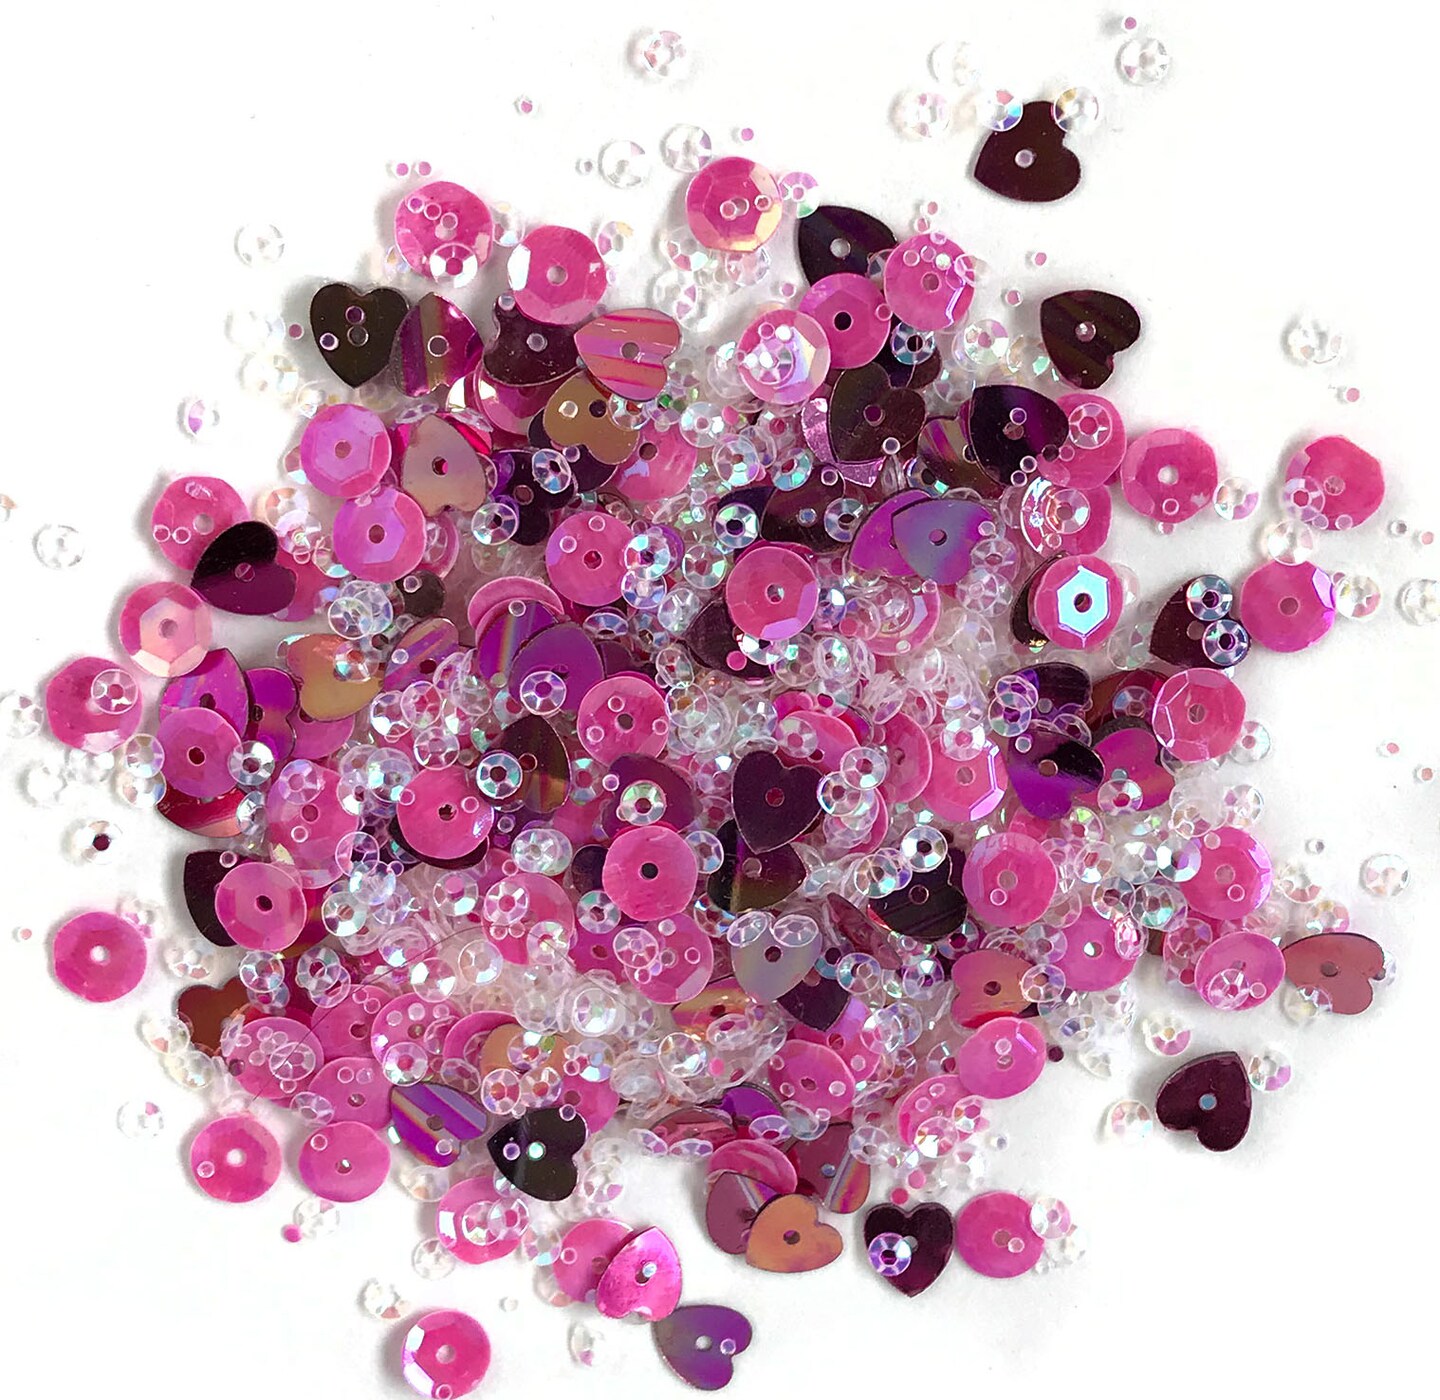 Creatology Assorted Cup Sequins | Michaels Kids